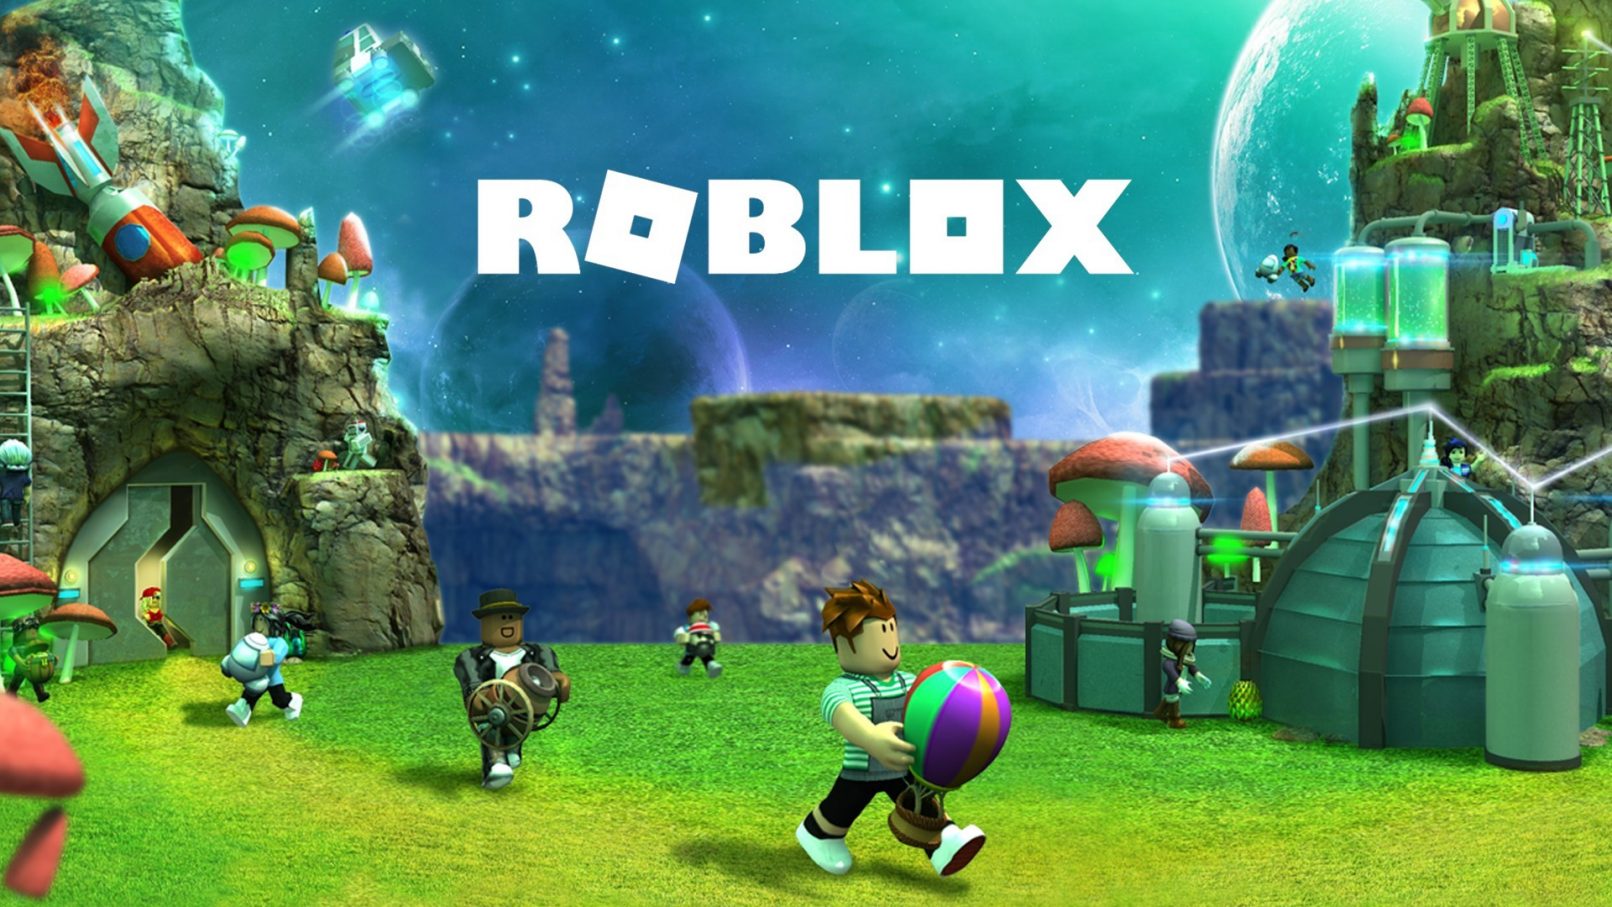 Free Cool Roblox Games Chrome Extension Hd Wallpaper Theme - roblox browser game